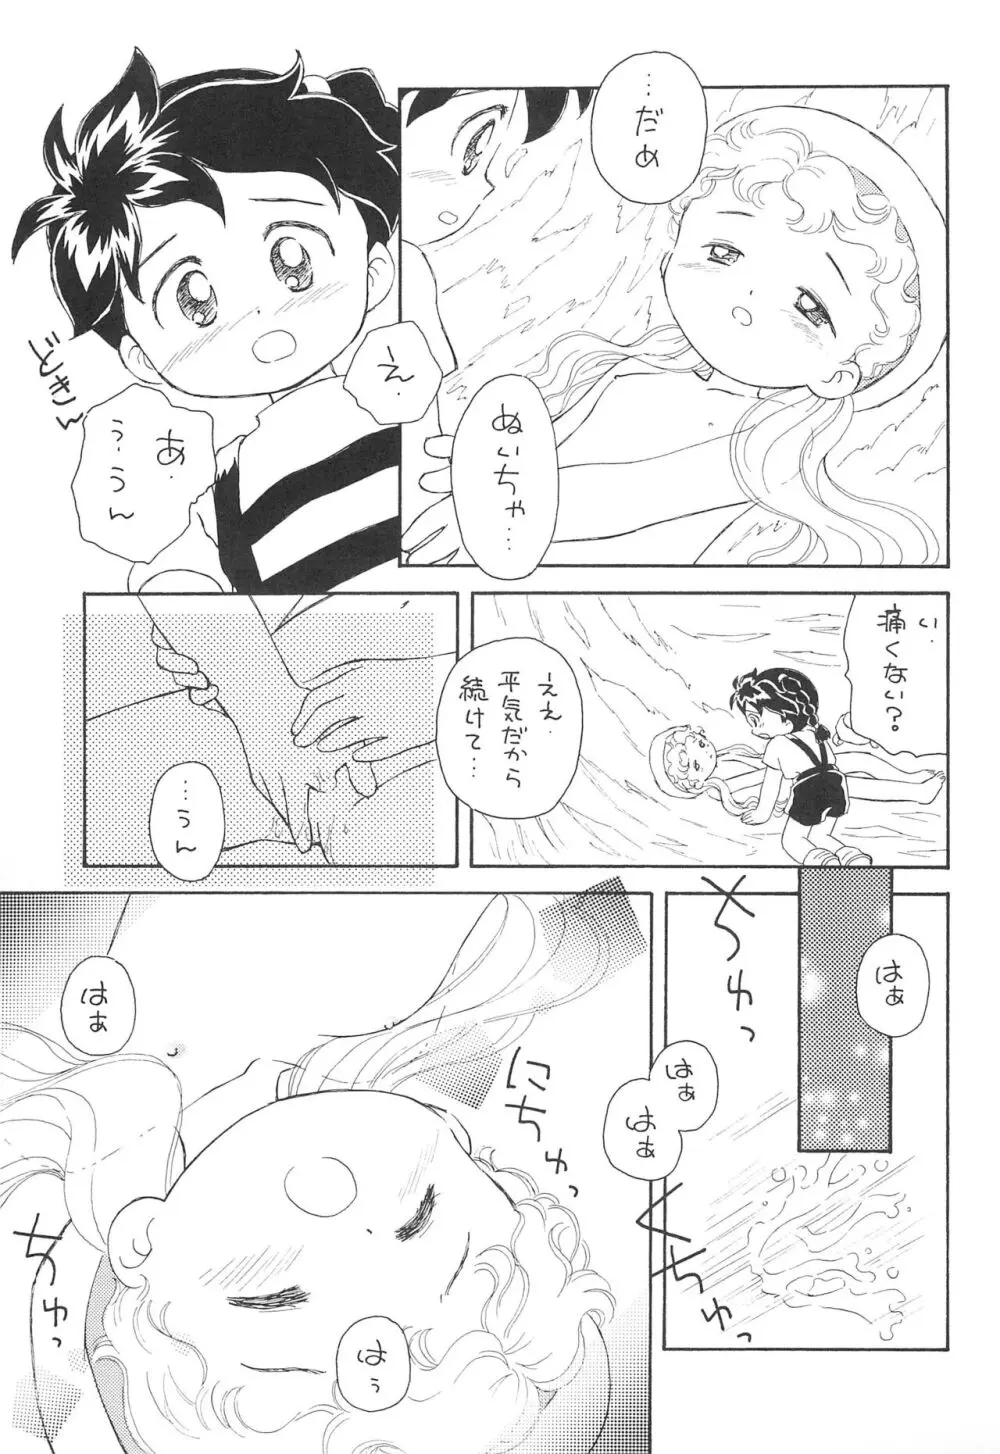 Fun House 9th Chame! - page73